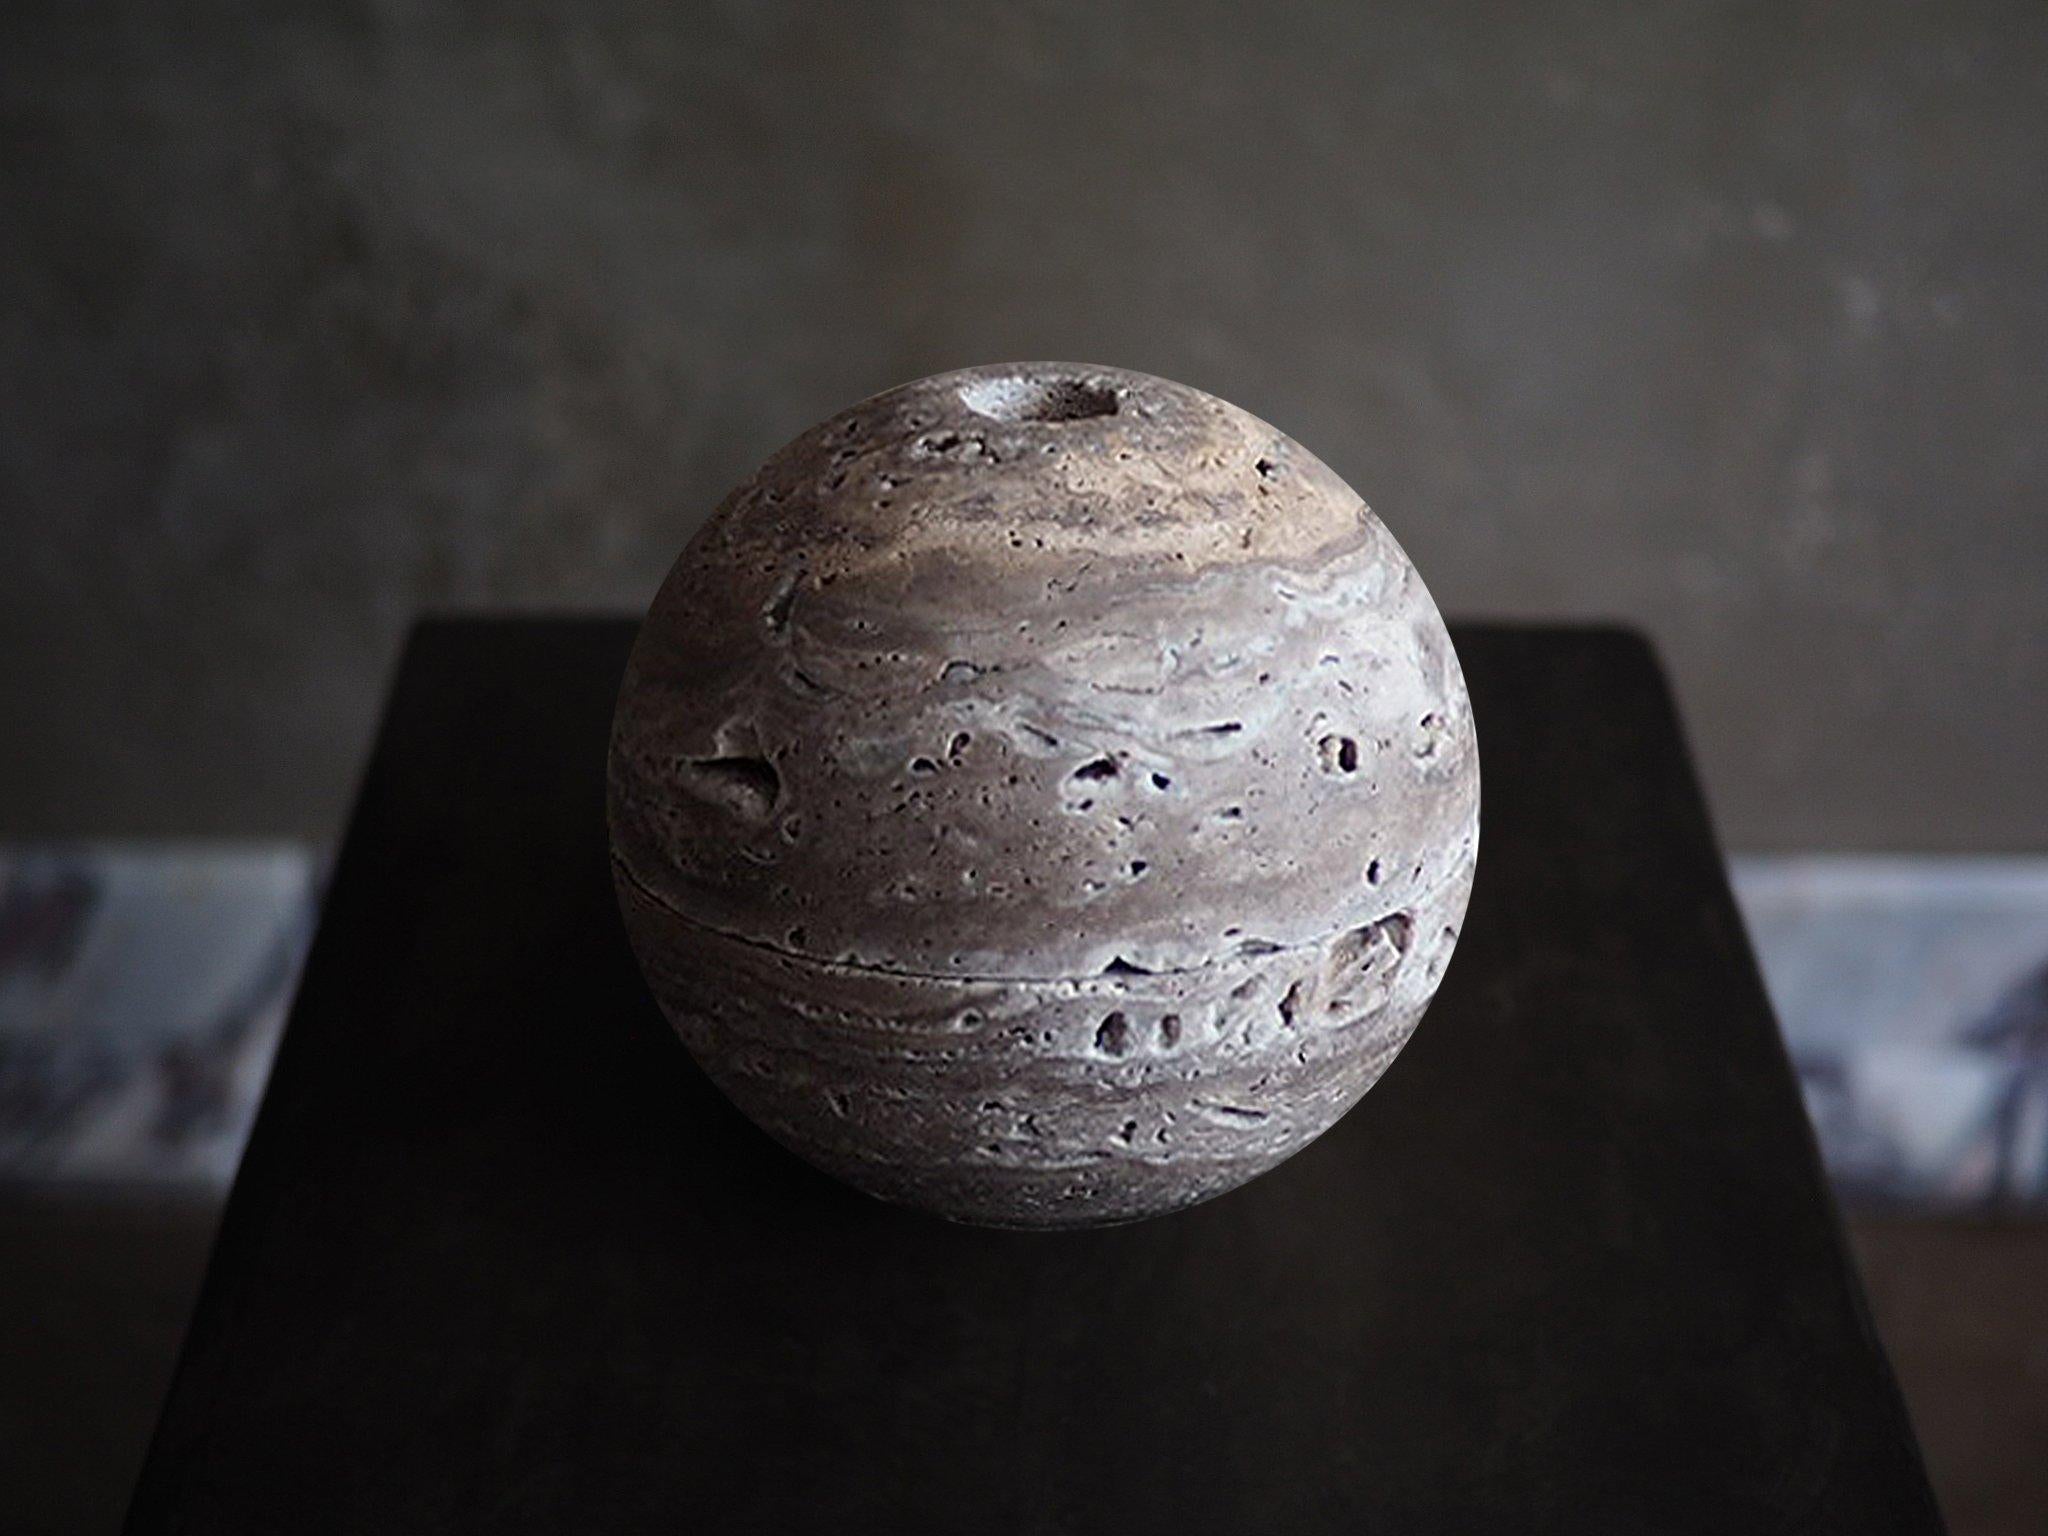 Sculpted from solid blocks of unfilled beige travertine, sphere censer by Brendan Tadler. Minimalist in form, the sphere censer acts as a quiet object to stimulate creativity and focus when activated with incense or sage. Inside the sphere, burn